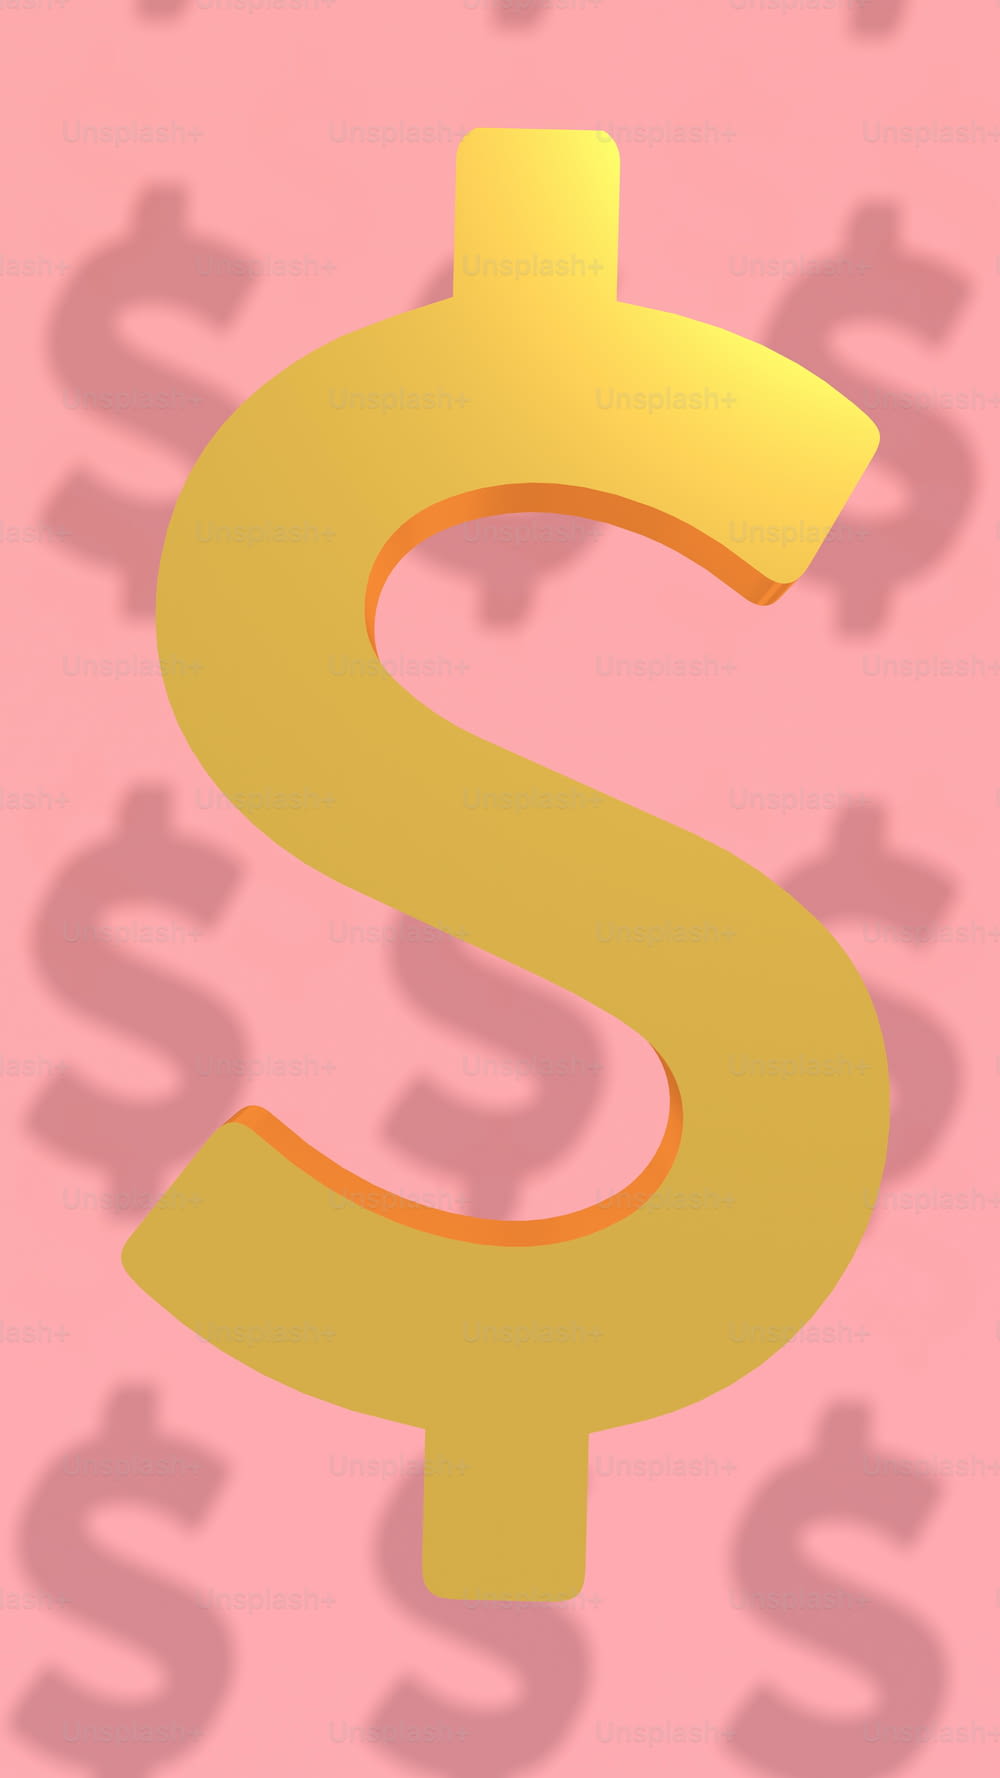 the shadow of a dollar sign on a pink background